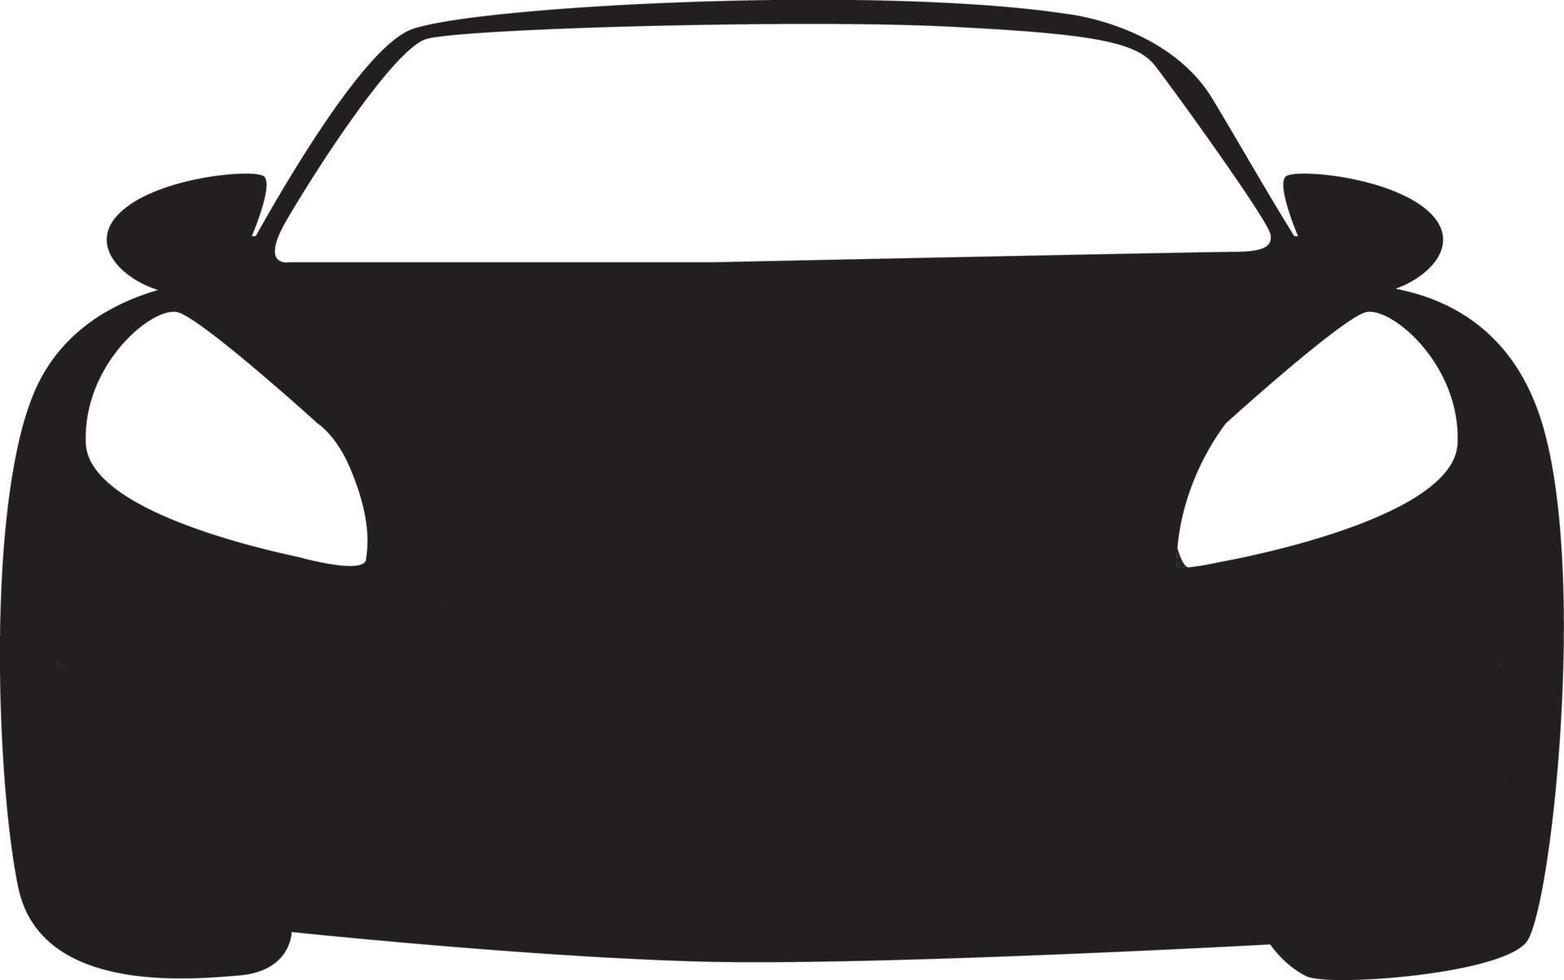 Car icon. Auto vehicle isolated. Transport icons. Automobile silhouette front view. Sedan car, vehicle or automobile symbol on white background vector